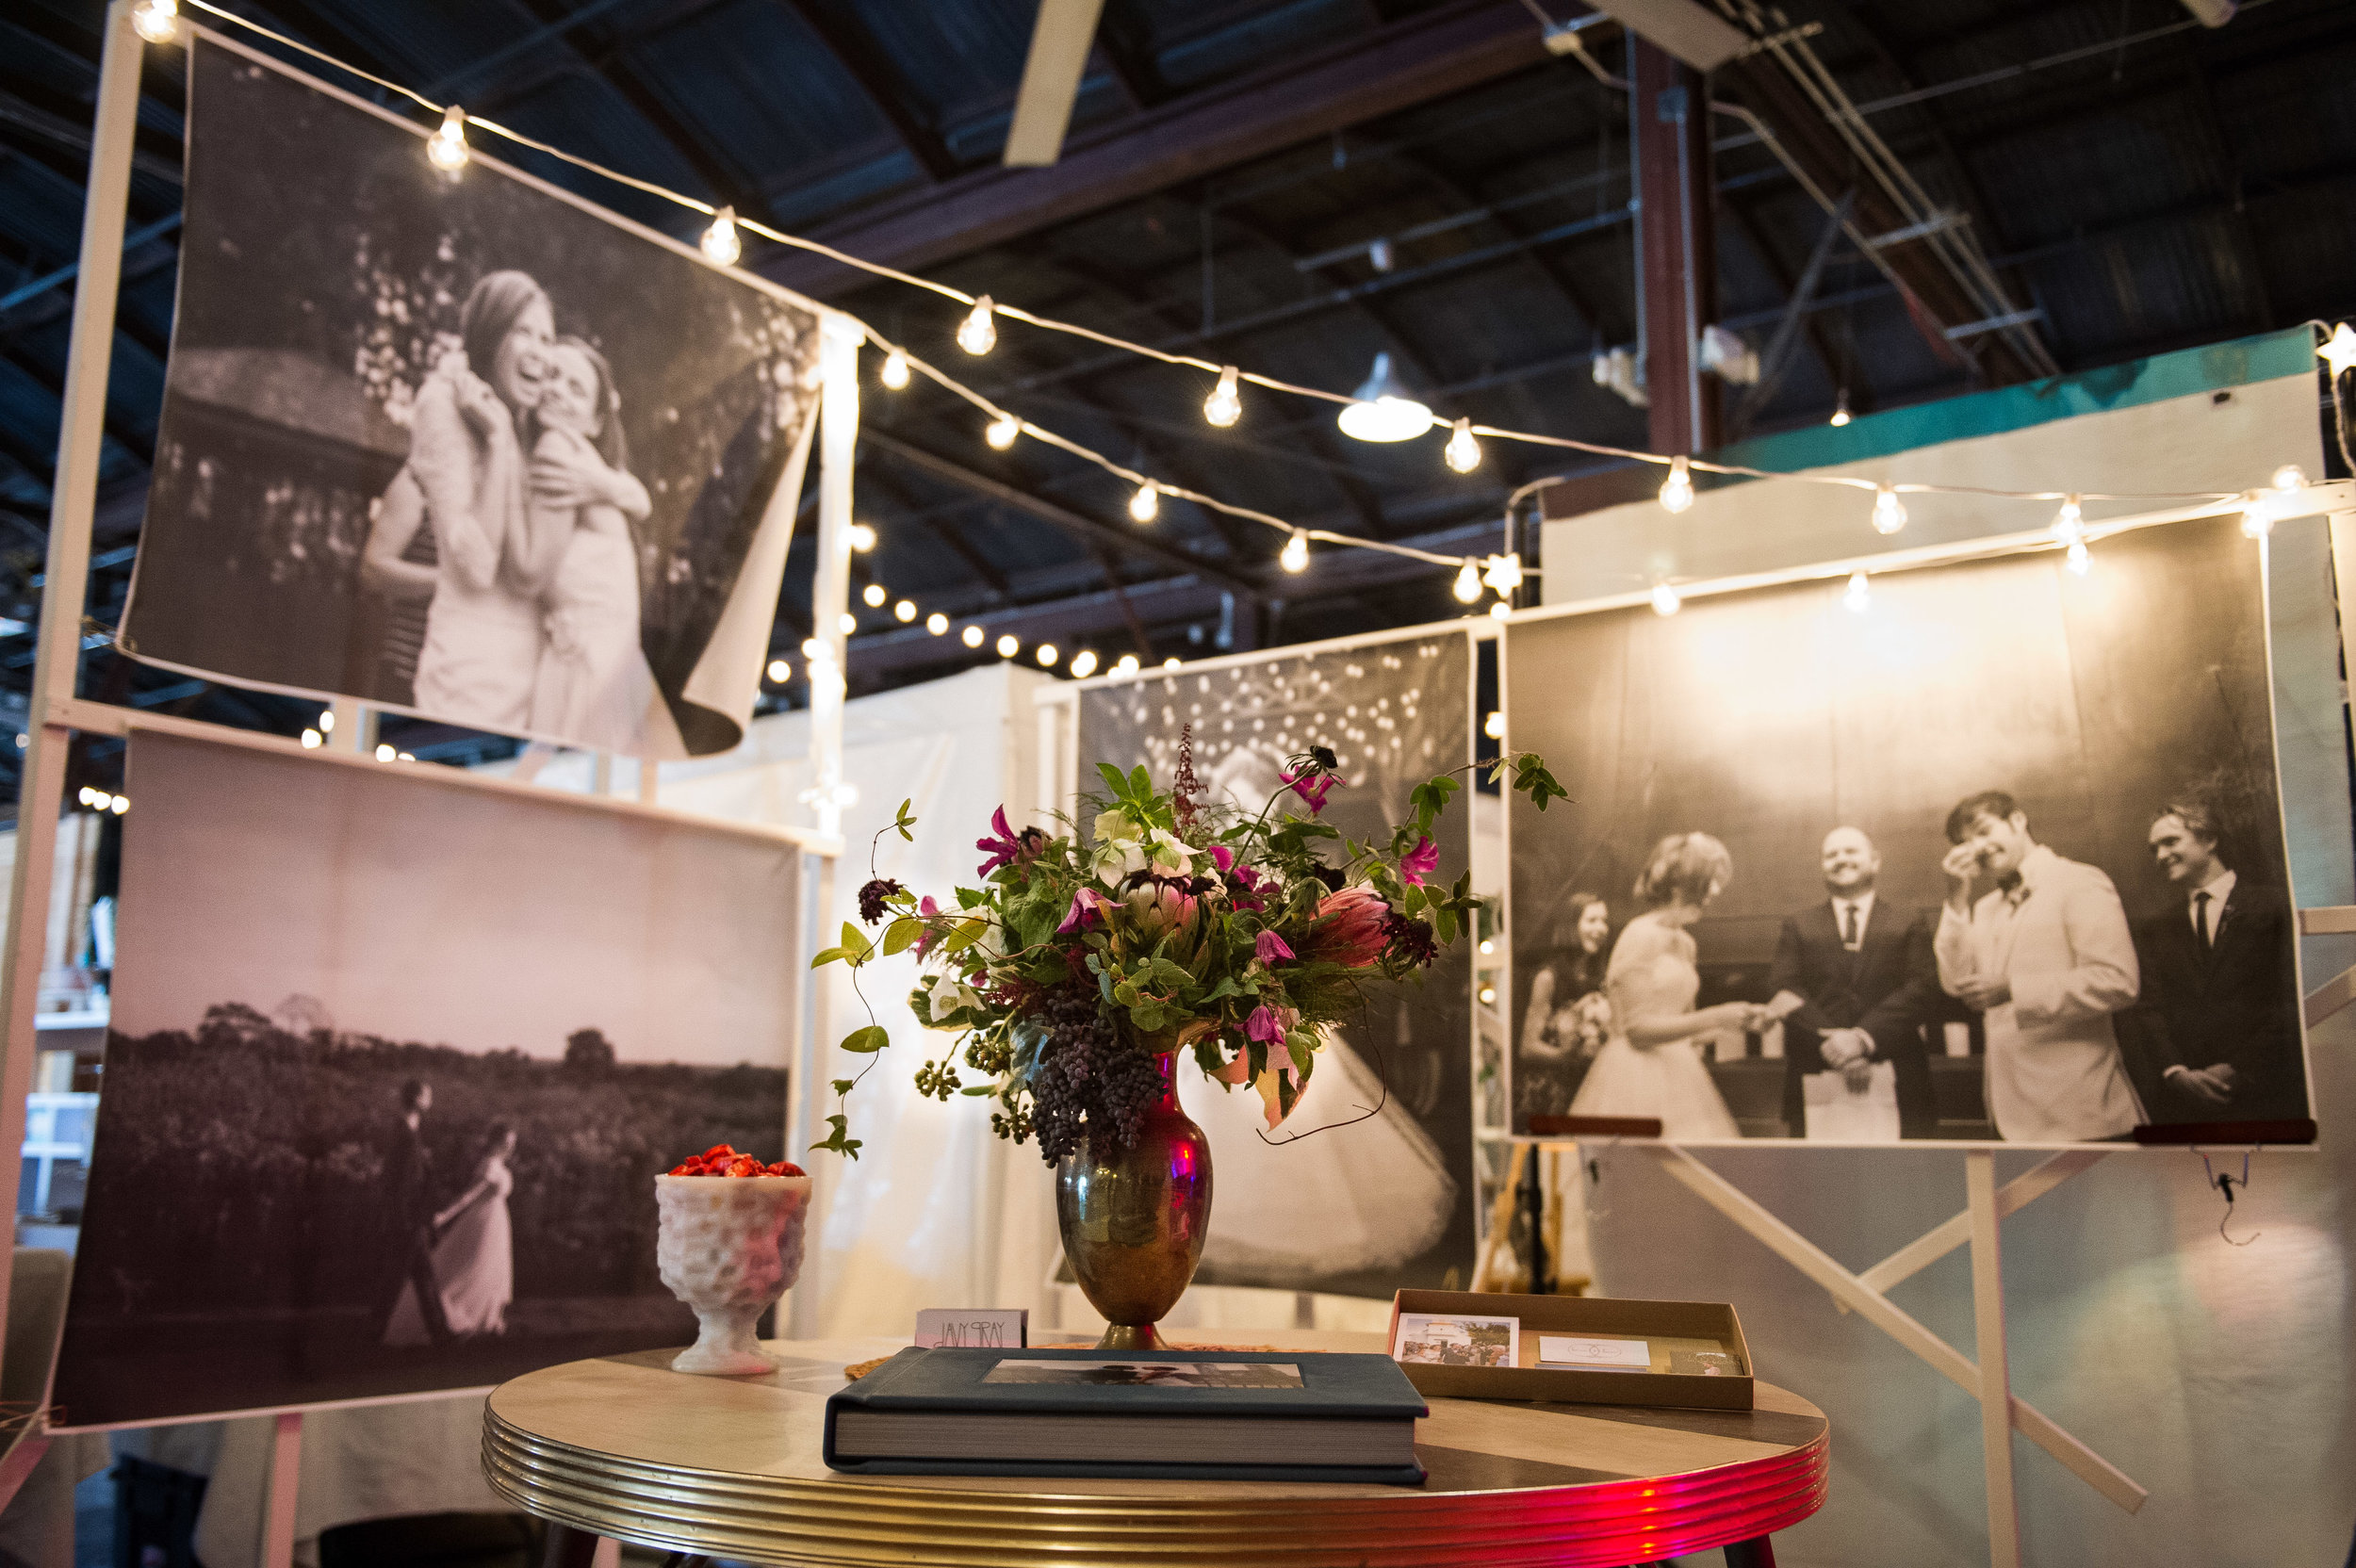 The Swoon Event | A New Orleans Wedding-Bridal Show